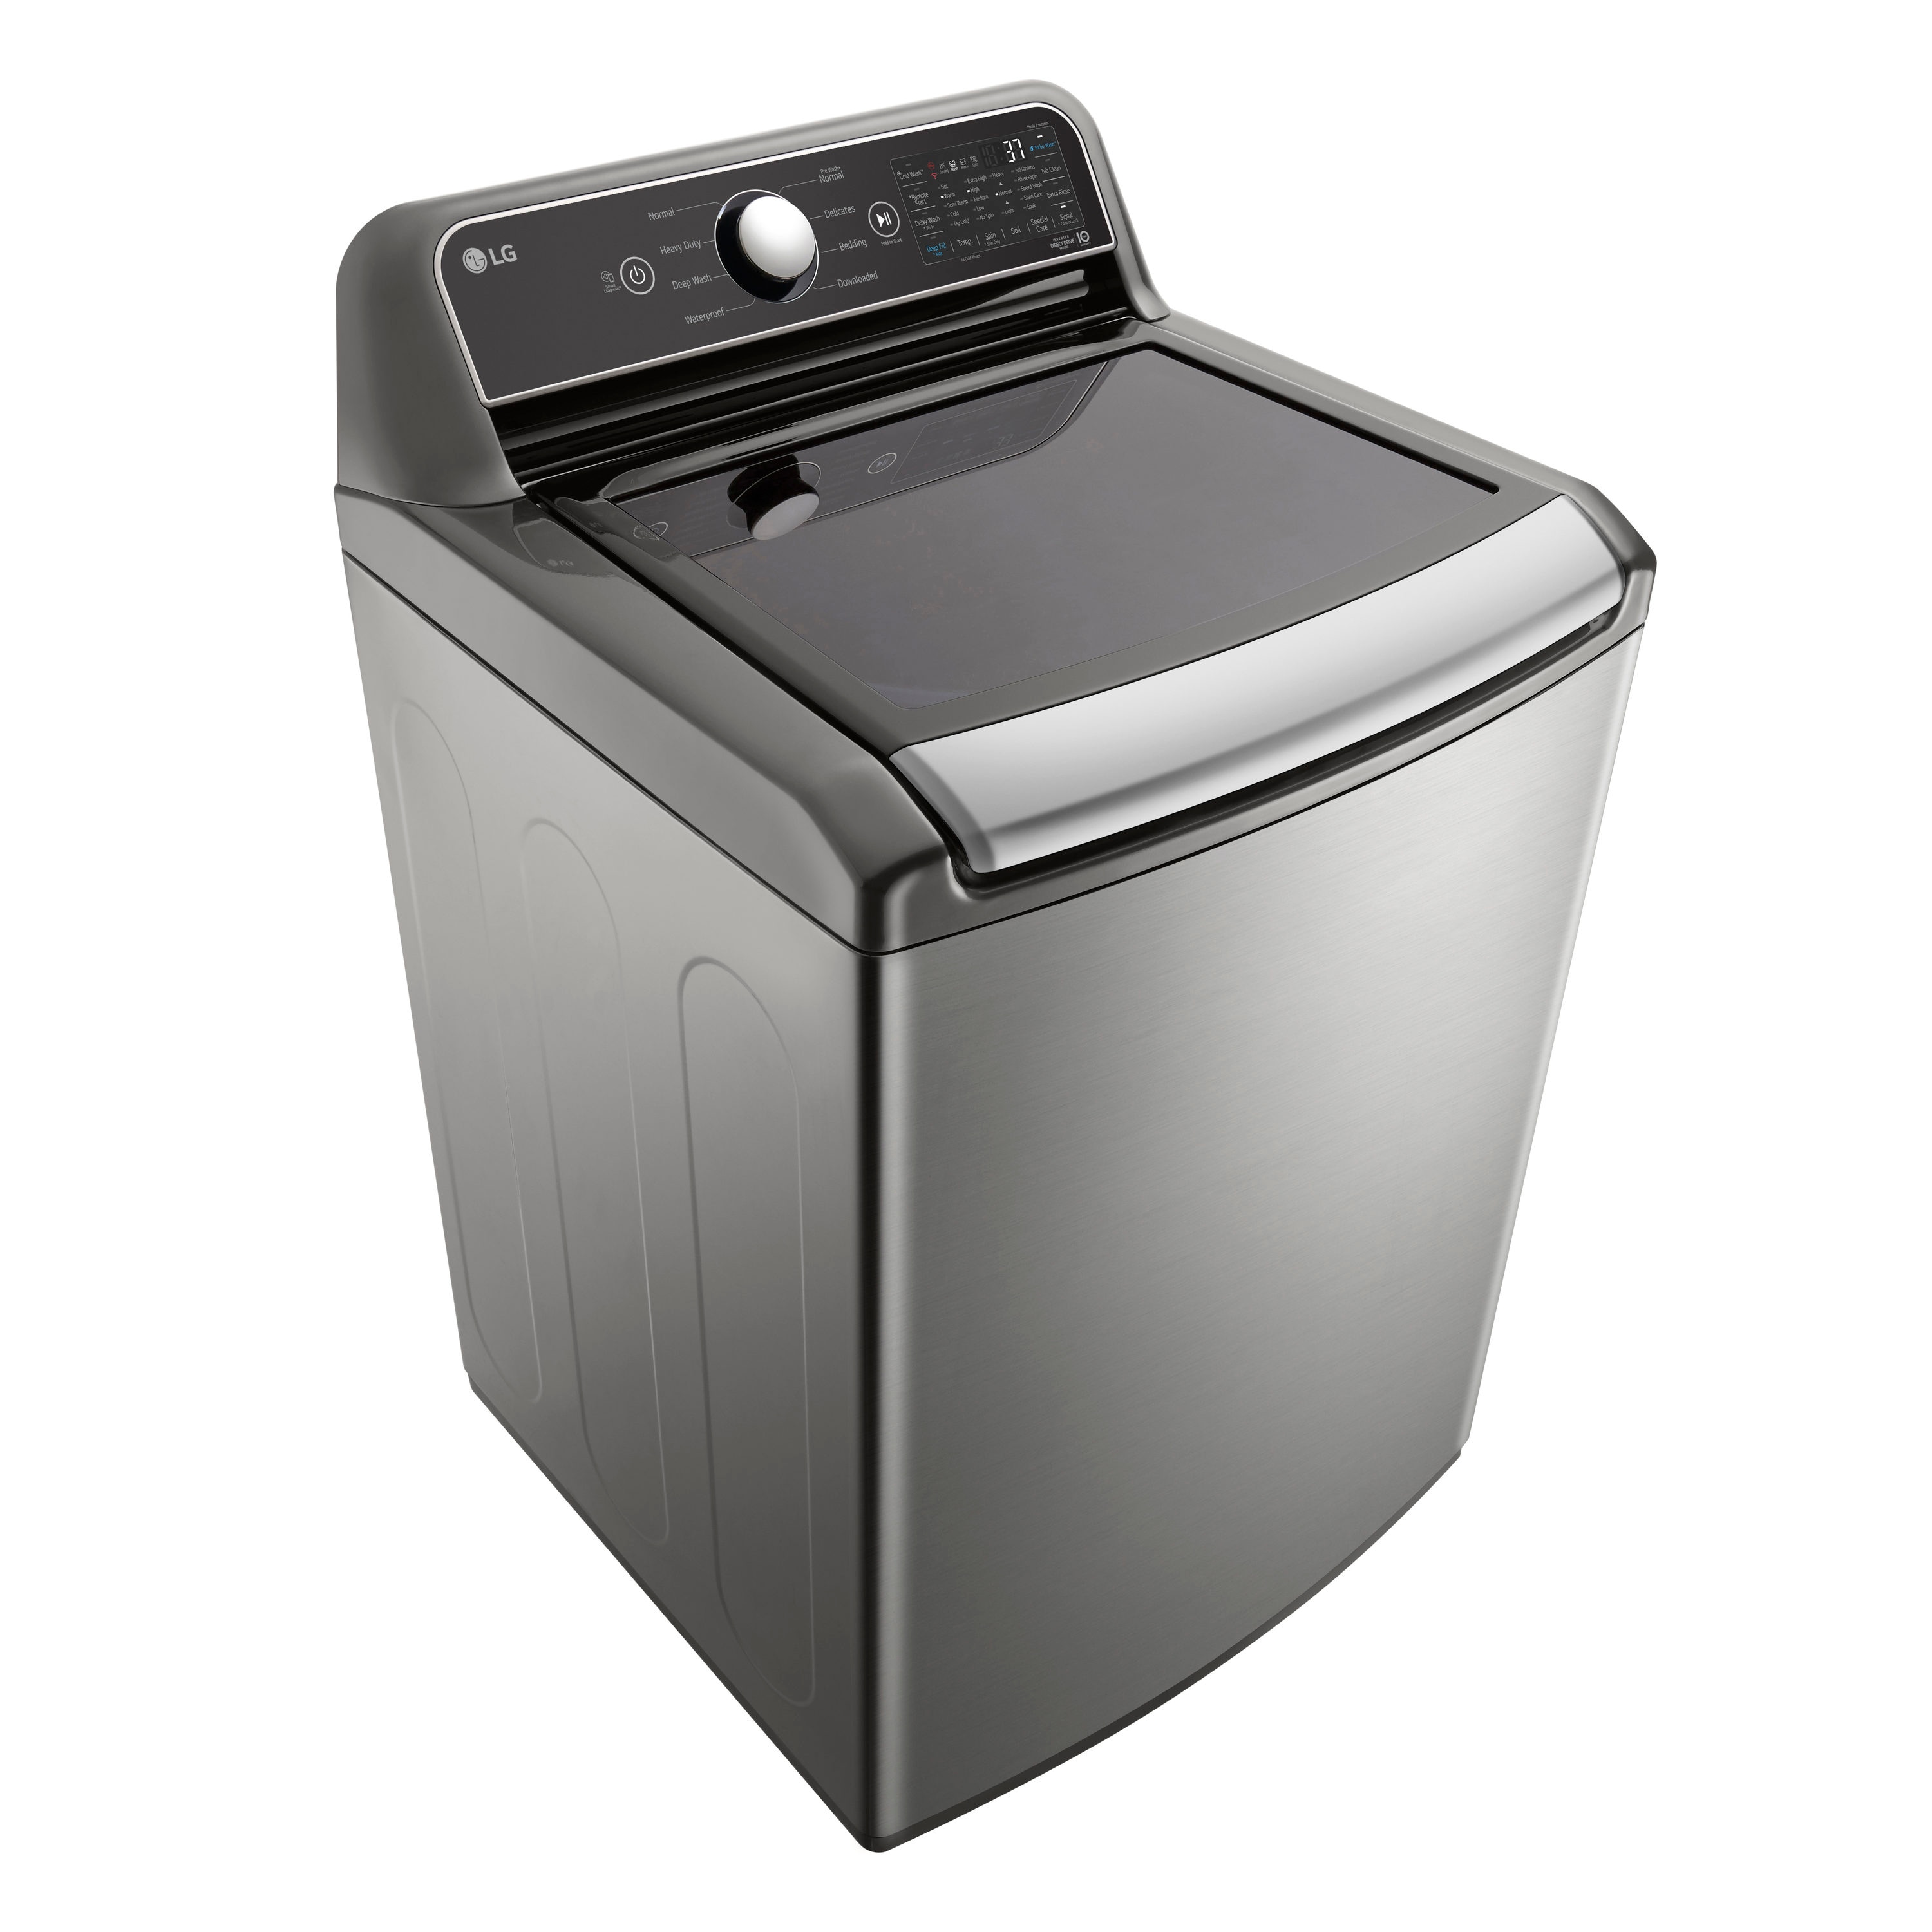 LG TurboWash 3D 4.8-cu ft Agitator Smart Top-Load Washer (Graphite Steel)  ENERGY STAR in the Top-Load Washers department at